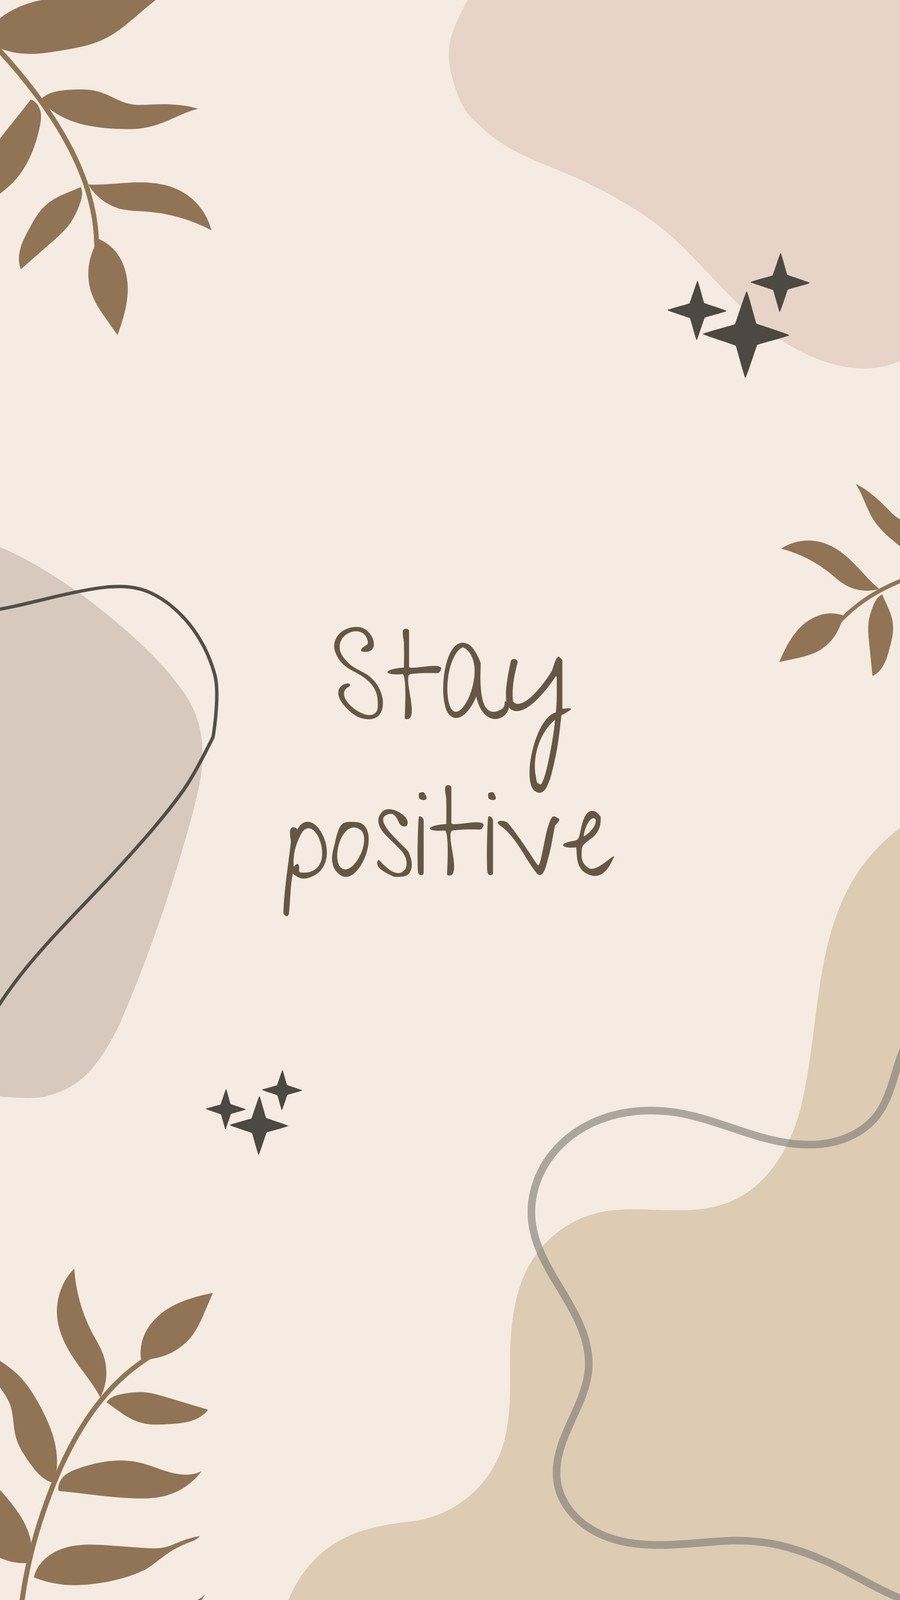 Stay positive wallpaper with abstract shapes and leaves.<ref> Aesthetic phone background</ref><box>(5,3),(994,995)</box> for your phone. - Gold, school, beige, art, doodles, terrazzo, Android, hand drawn, paper, positive, peach, pretty, marble, simple, cool, April, couple, minimalist beige, phone, cream